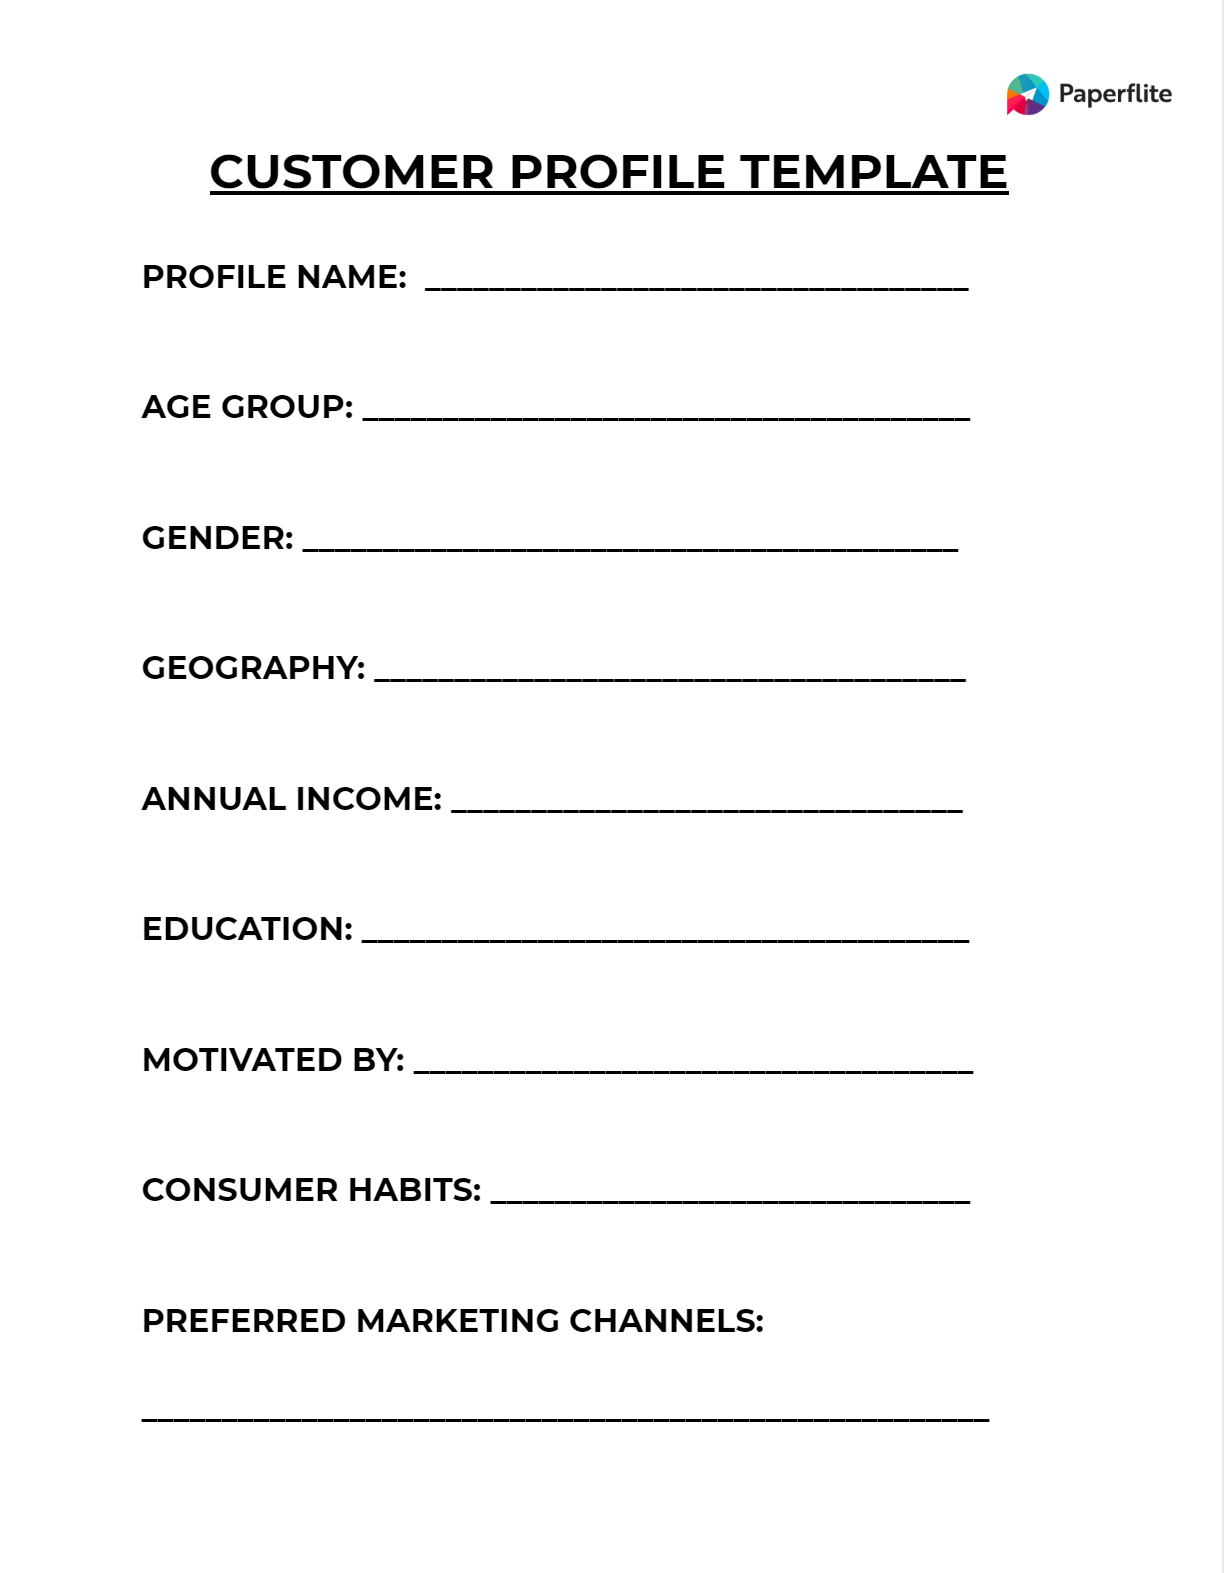 Customer Profile Template to Identify a Target Audience